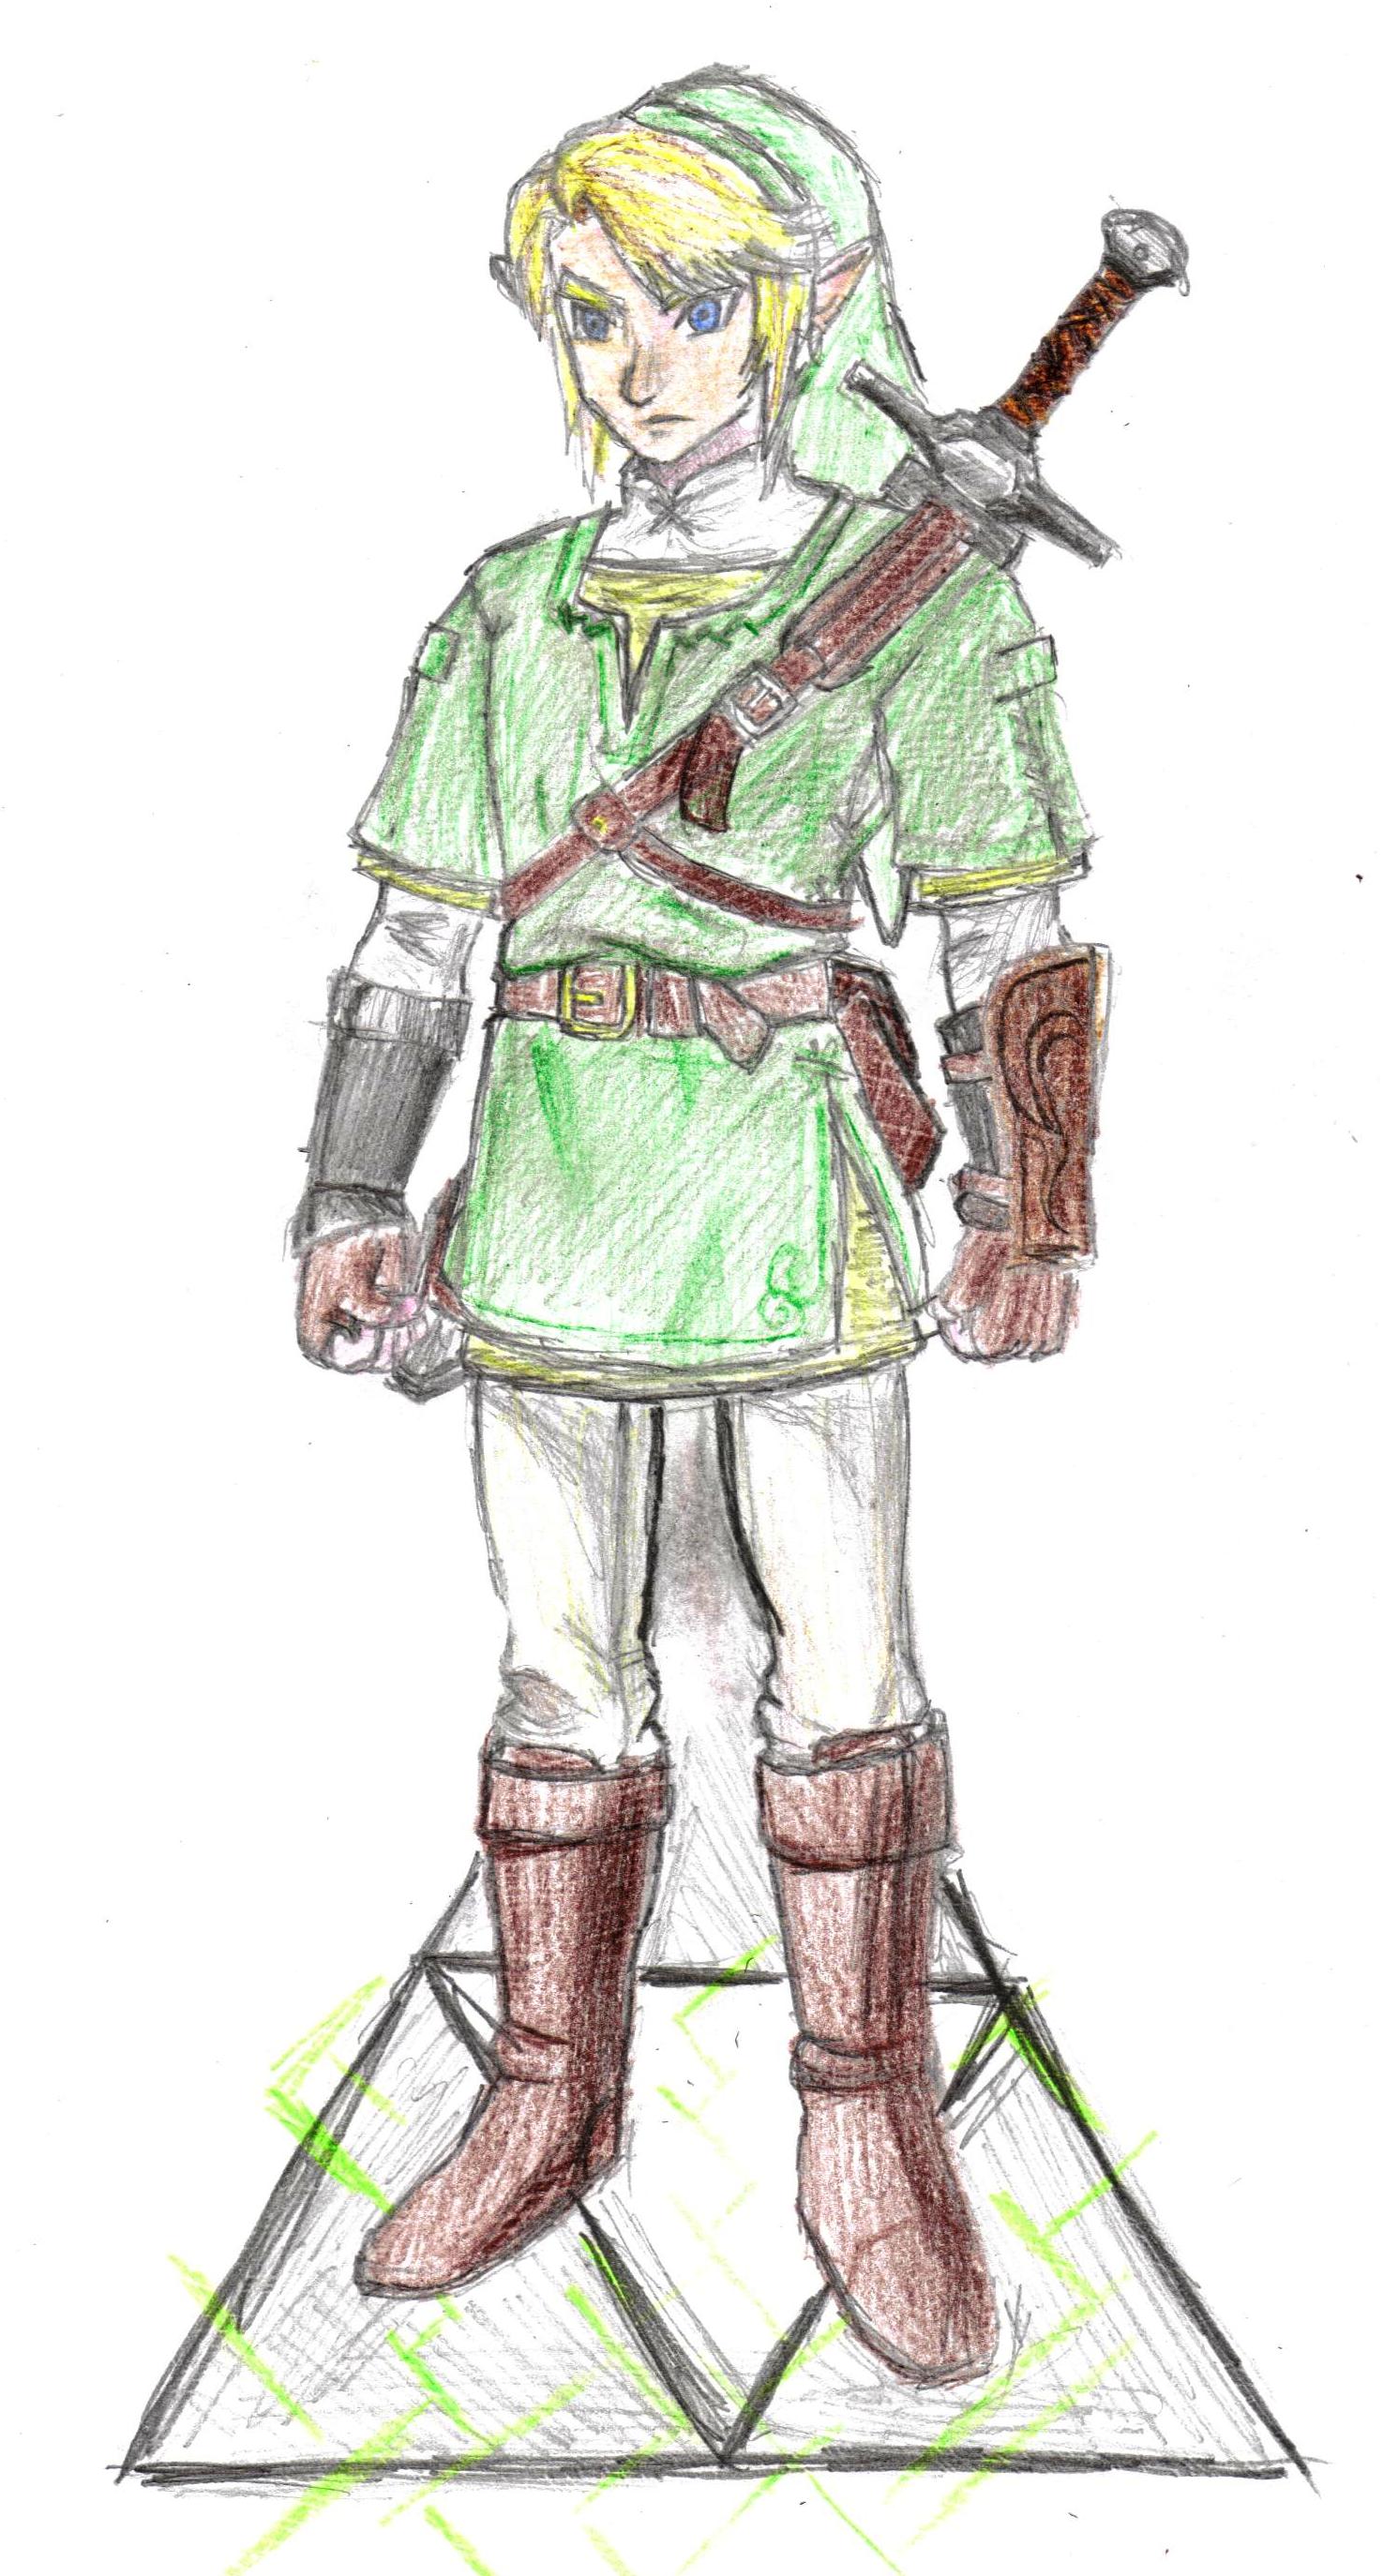 Link in his tunic.